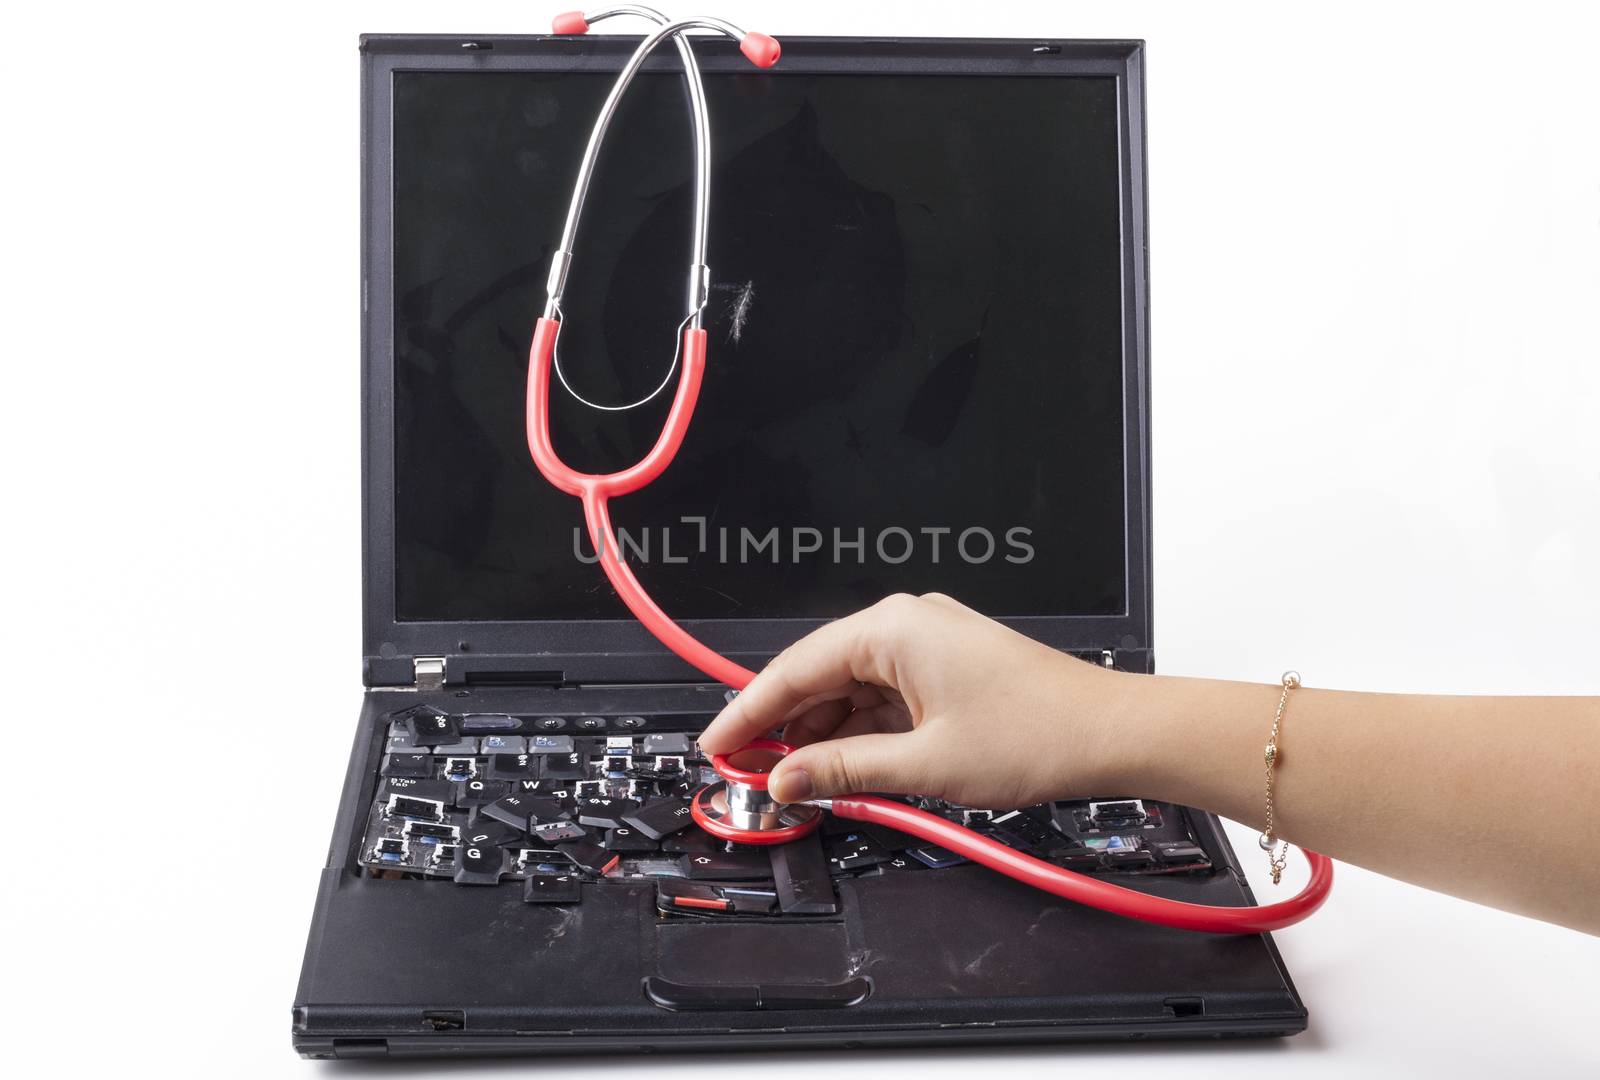 Hand examining broken laptop with red stethoscope isolated on white background